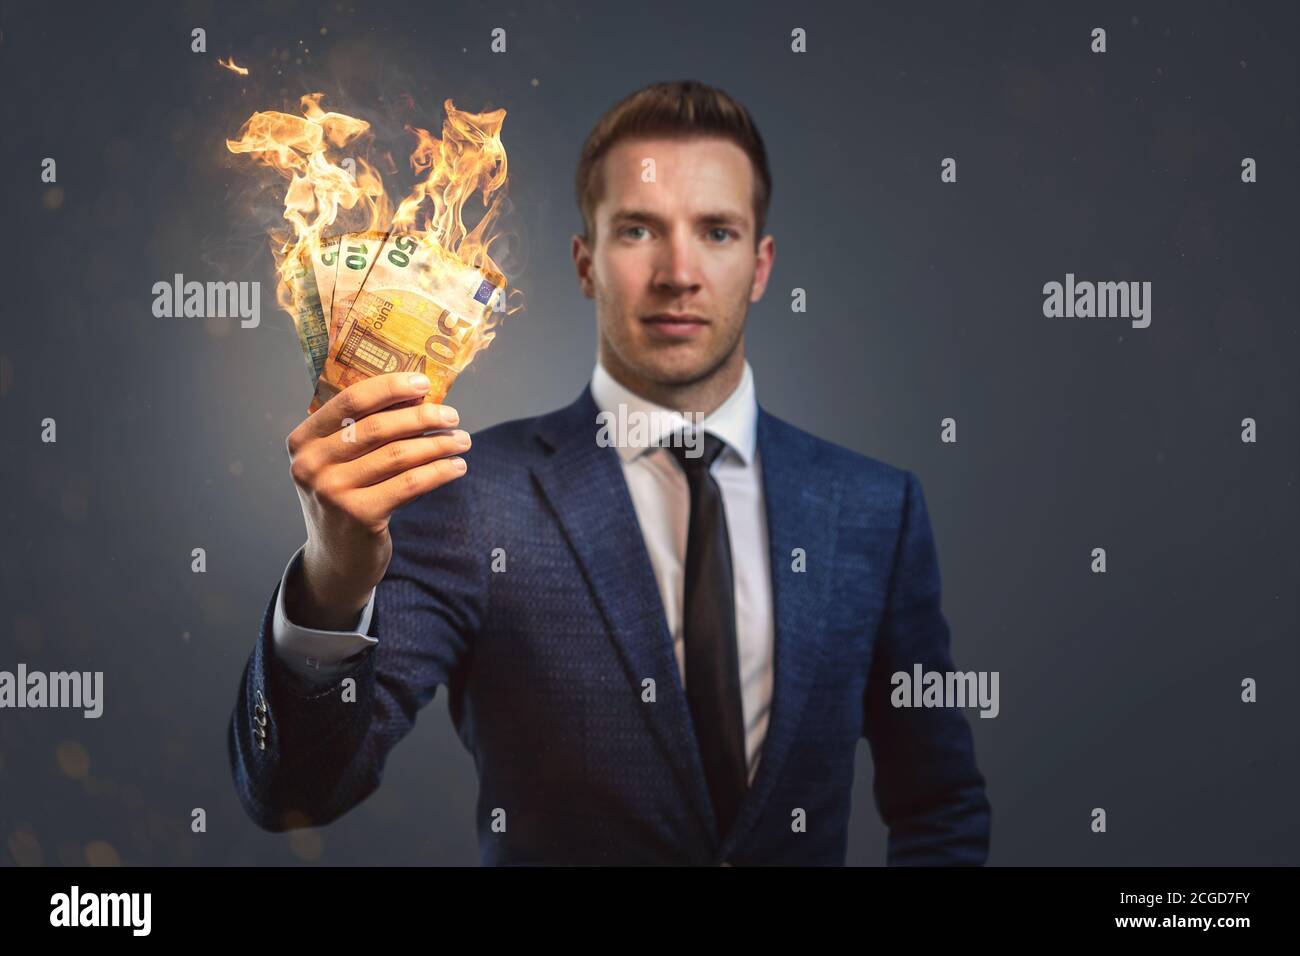 Businessman holding burning money in his hand Stock Photo